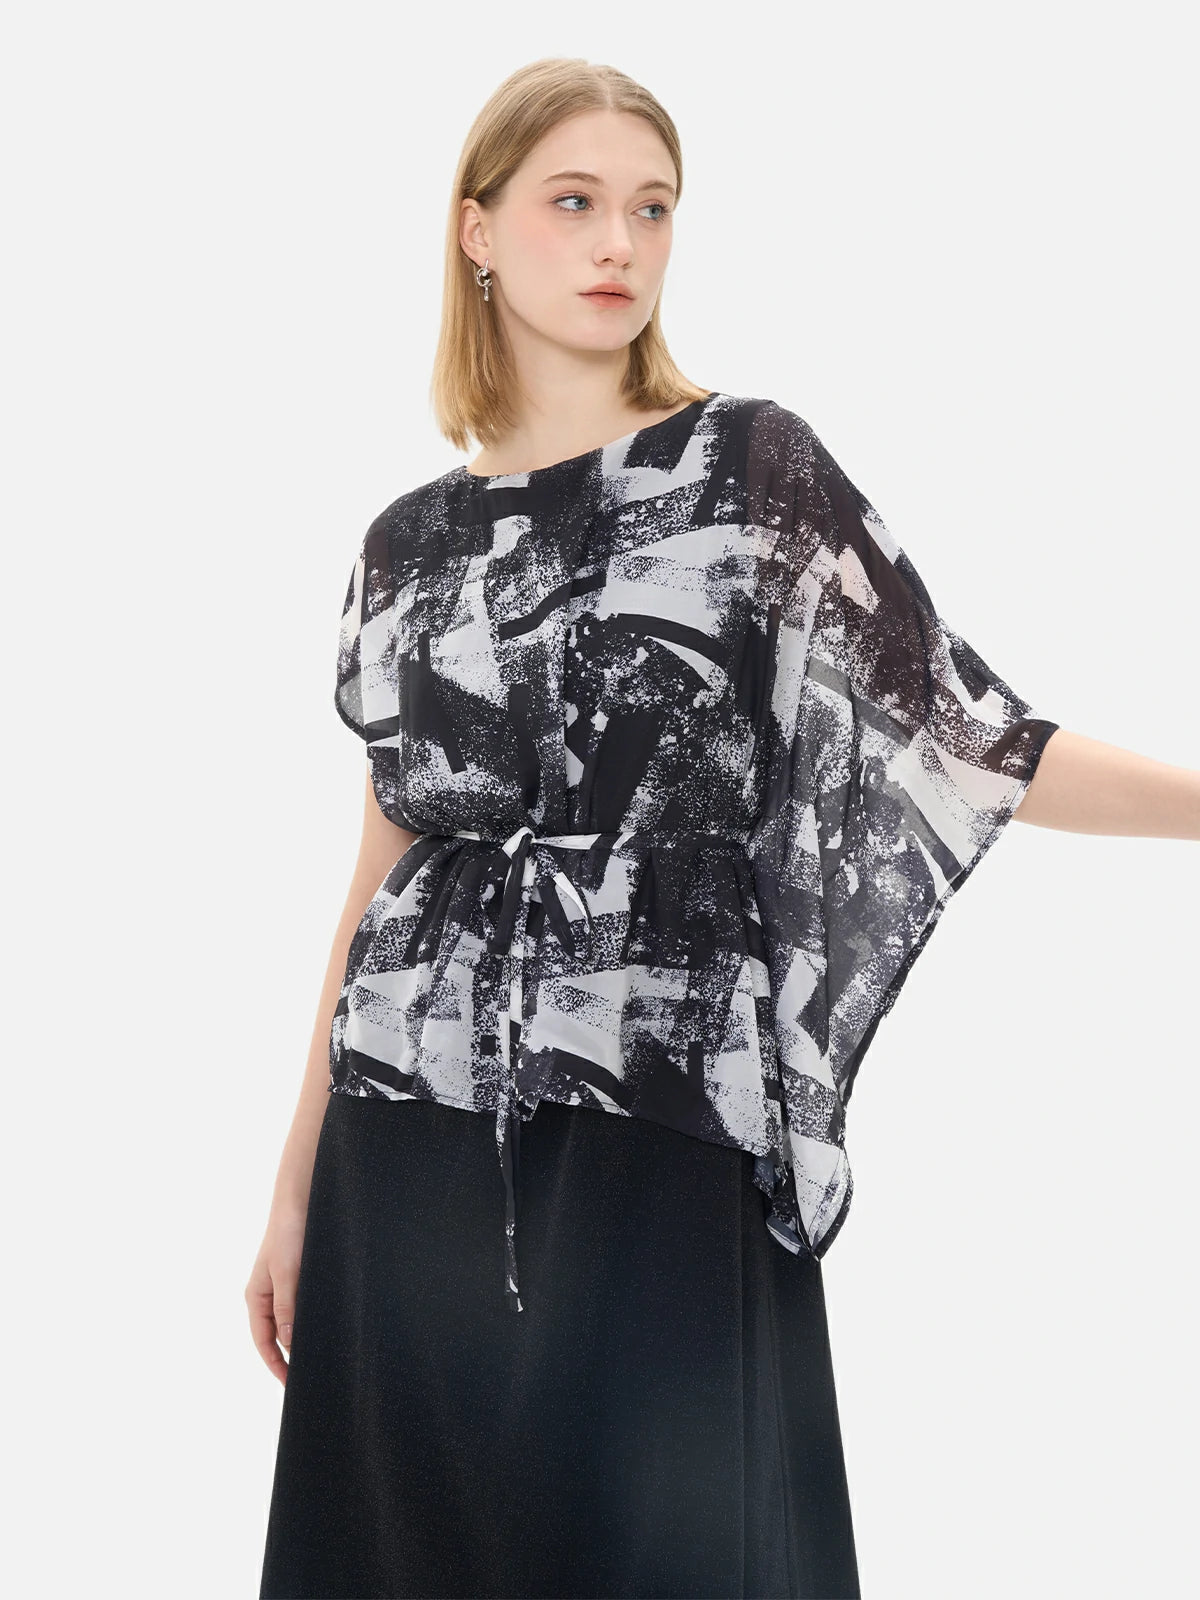 Artistic black and white watercolor dress with asymmetrical sleeves